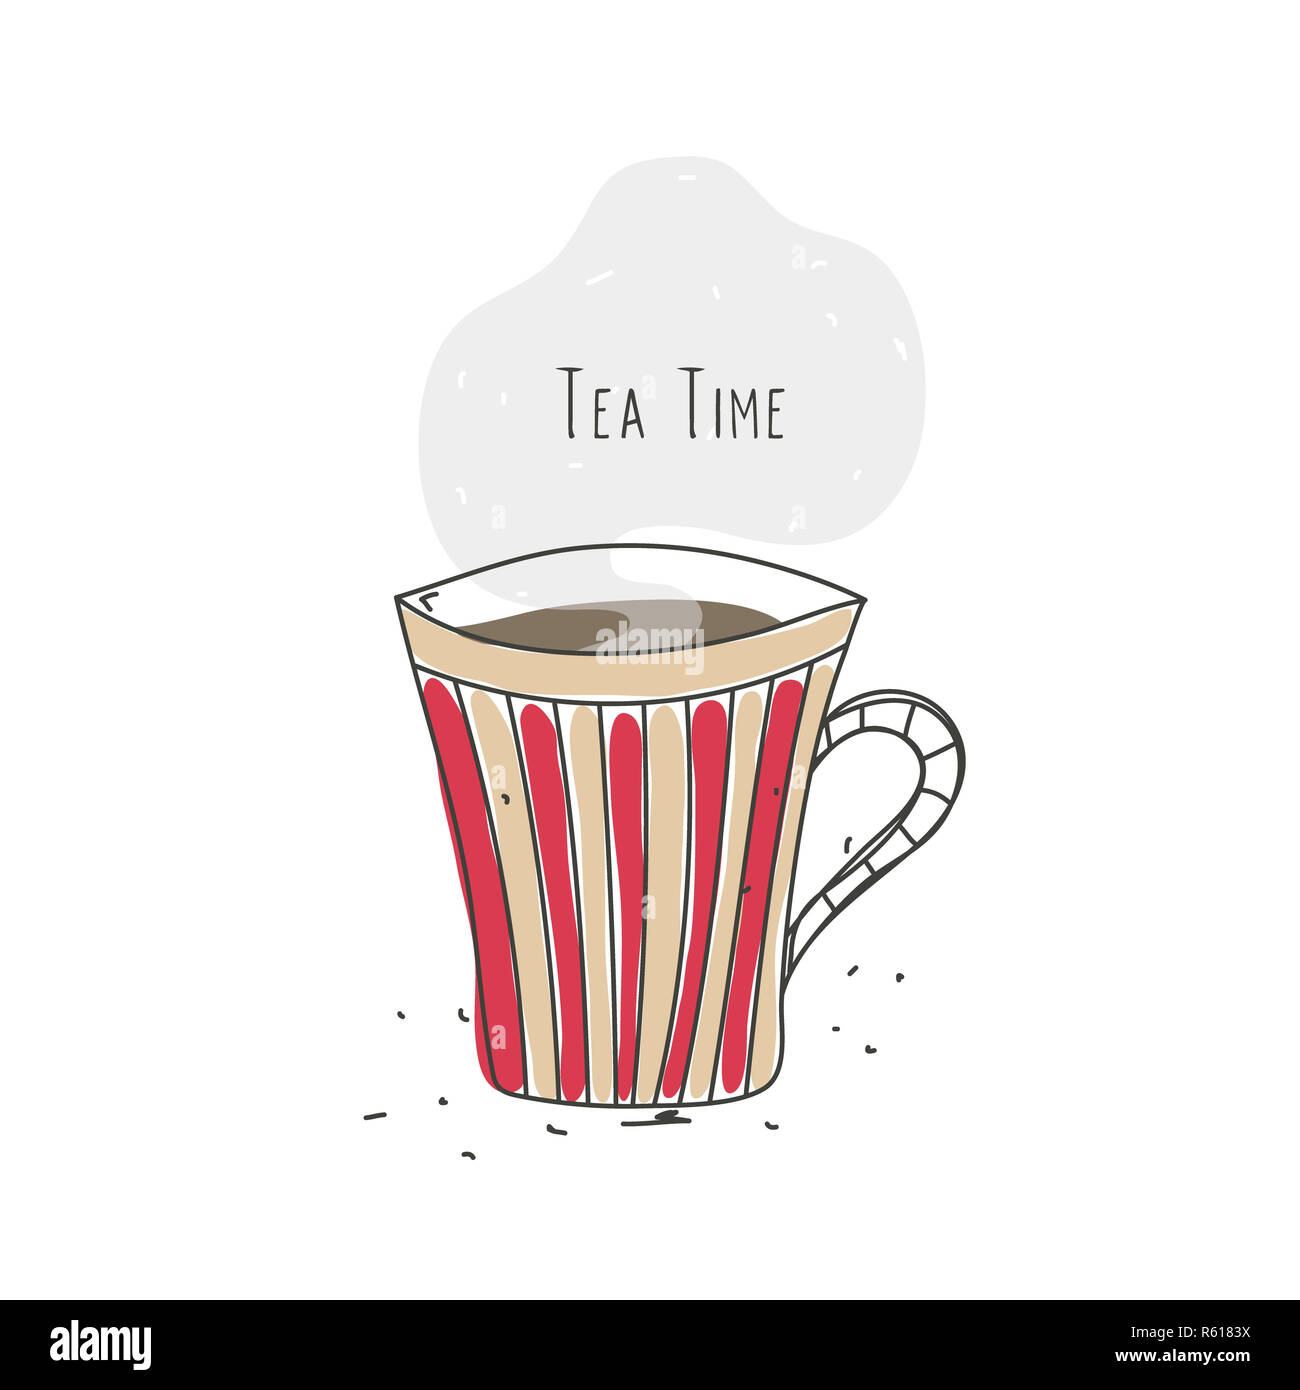 Tea time. Striped cup with hot drink. Line design. Doodle. Poster, logo, emblem, icon for cafe or restaurant Stock Photo